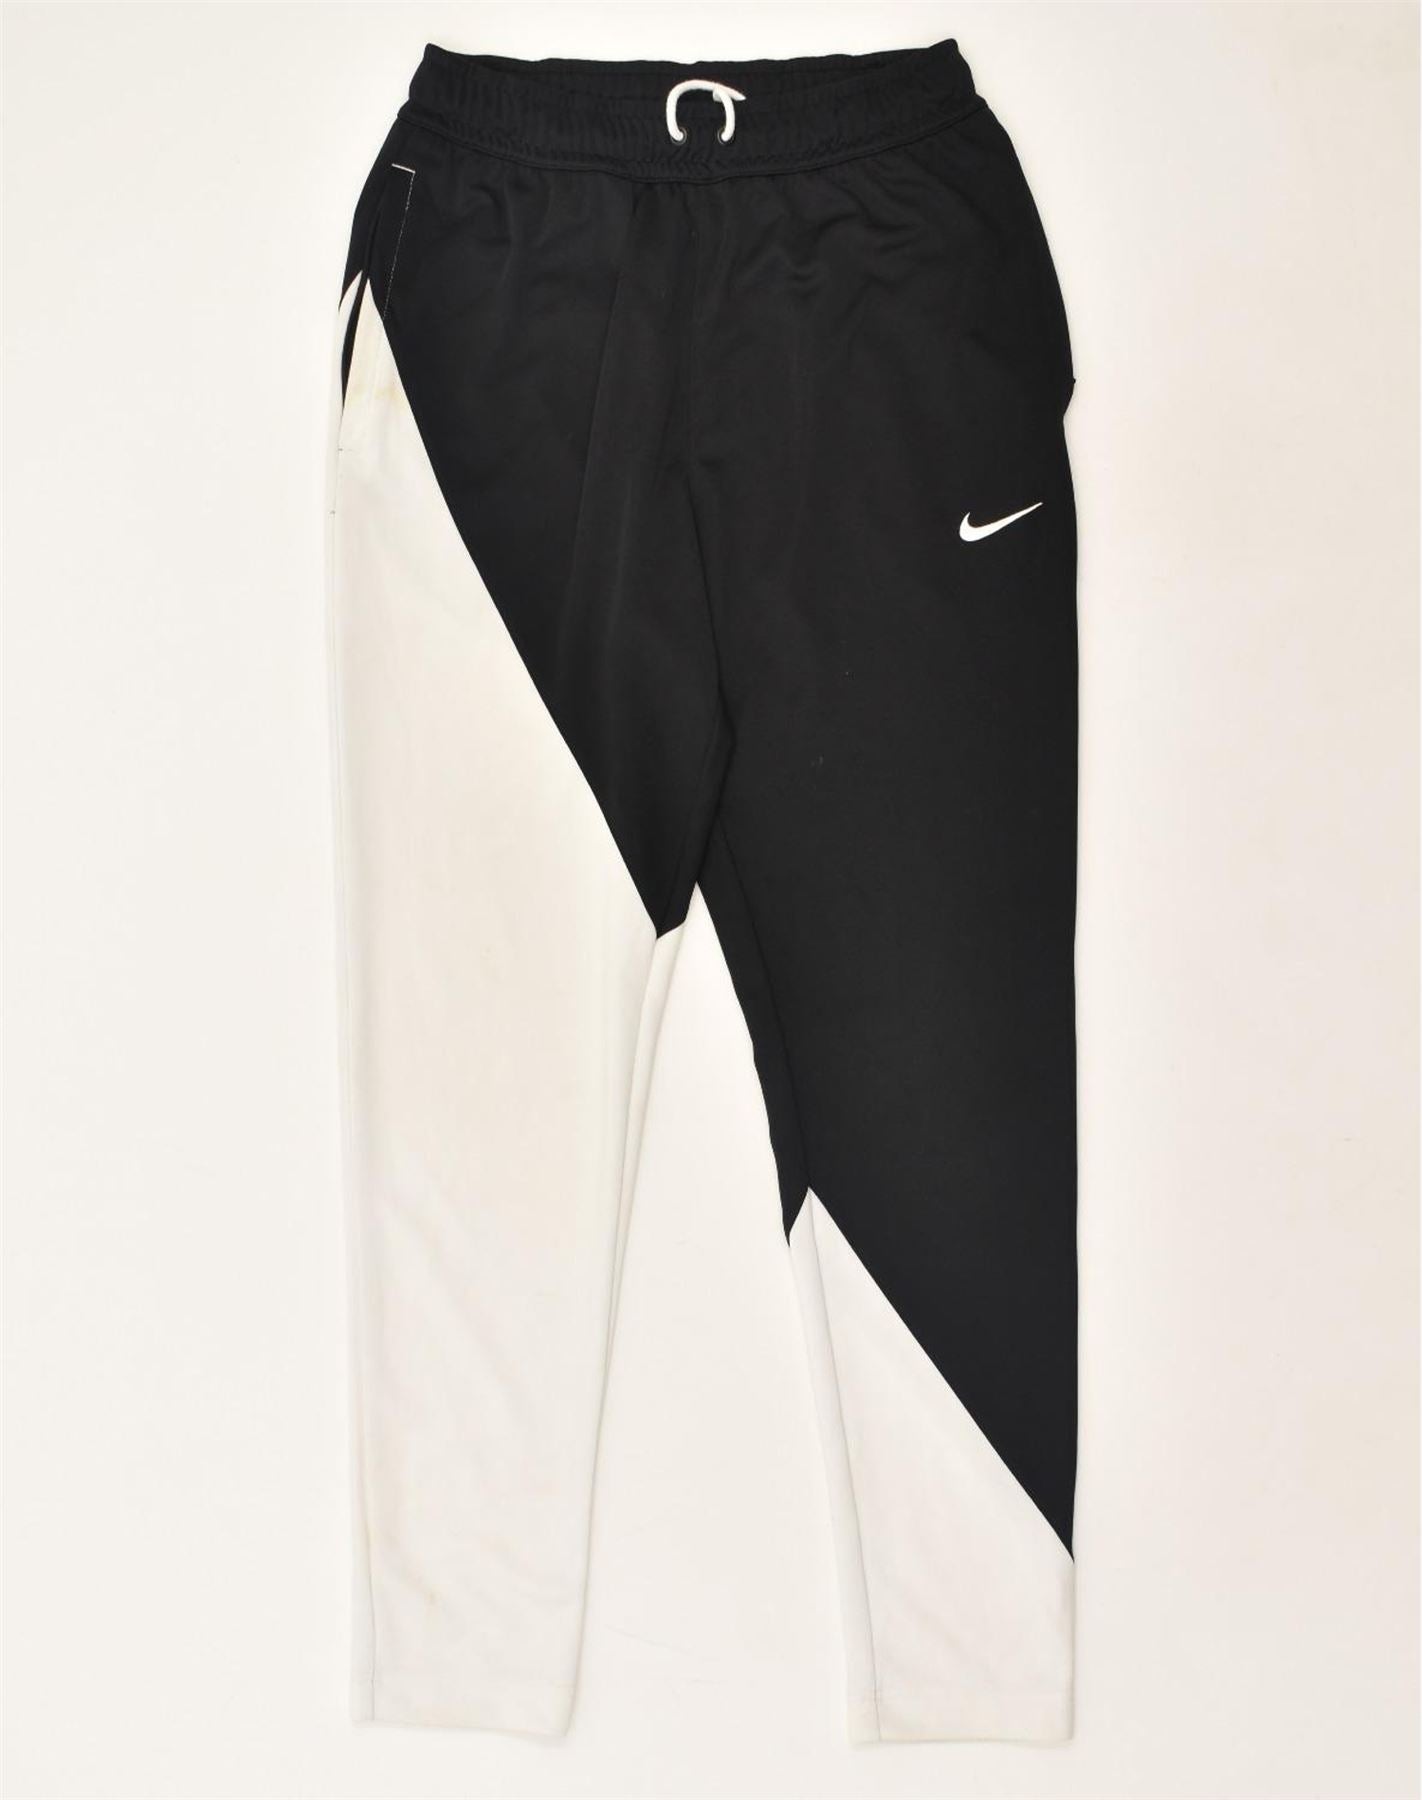 NIKE Womens Graphic Slim Tracksuit Trousers UK 10 Small Black Colourblock, Vintage & Second-Hand Clothing Online